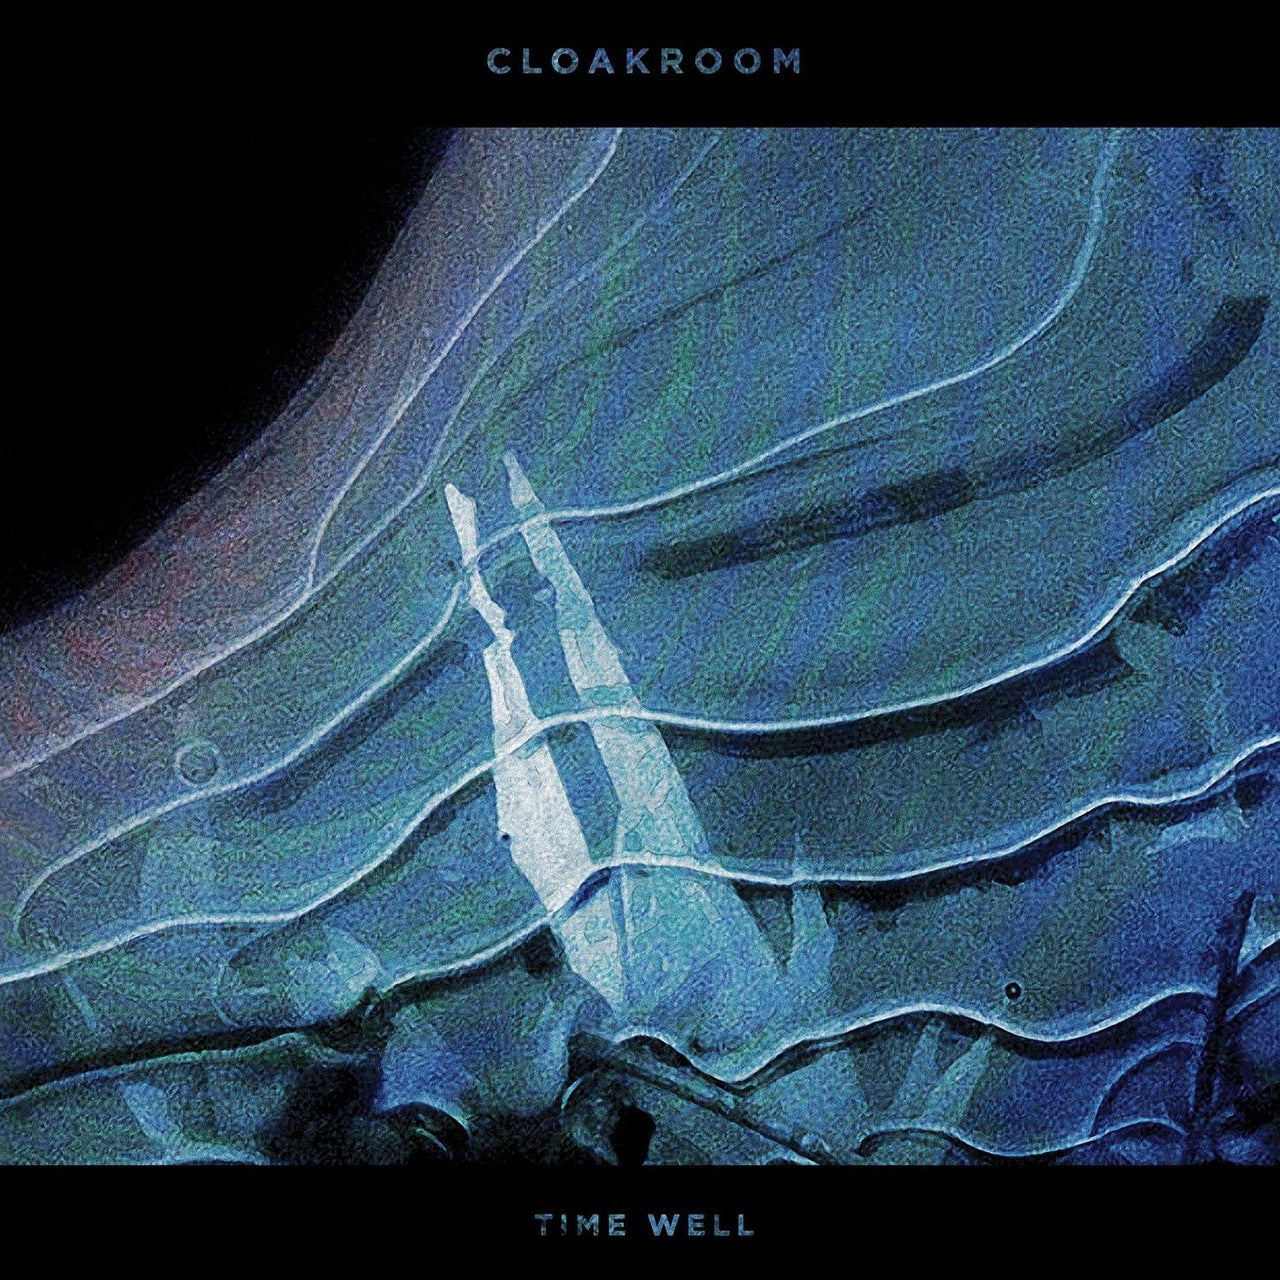 Buy – Cloakroom "Time Well" CD – Band & Music Merch – Cold Cuts Merch